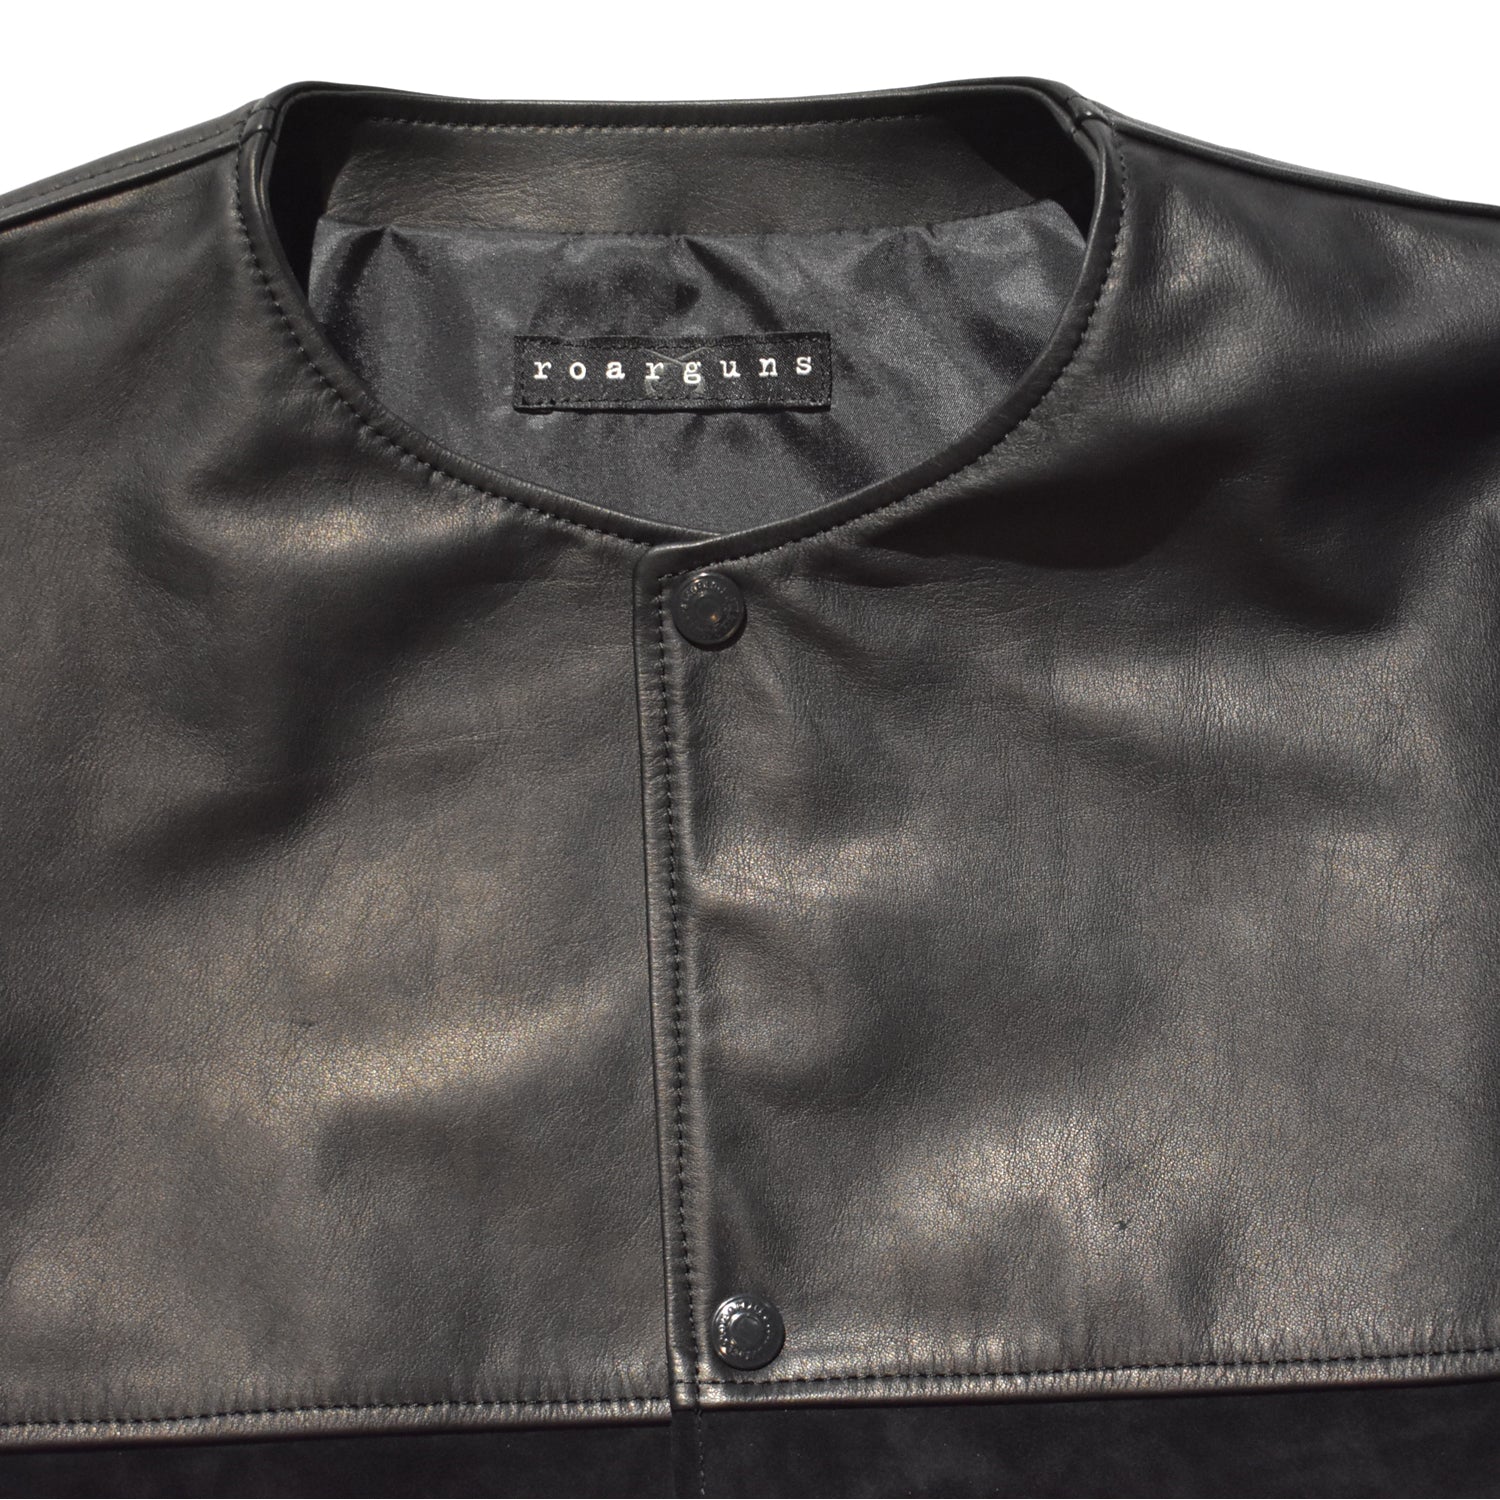 Load image into Gallery viewer, HYBRID LEATHER JACKET CRYSTAL / BLACK